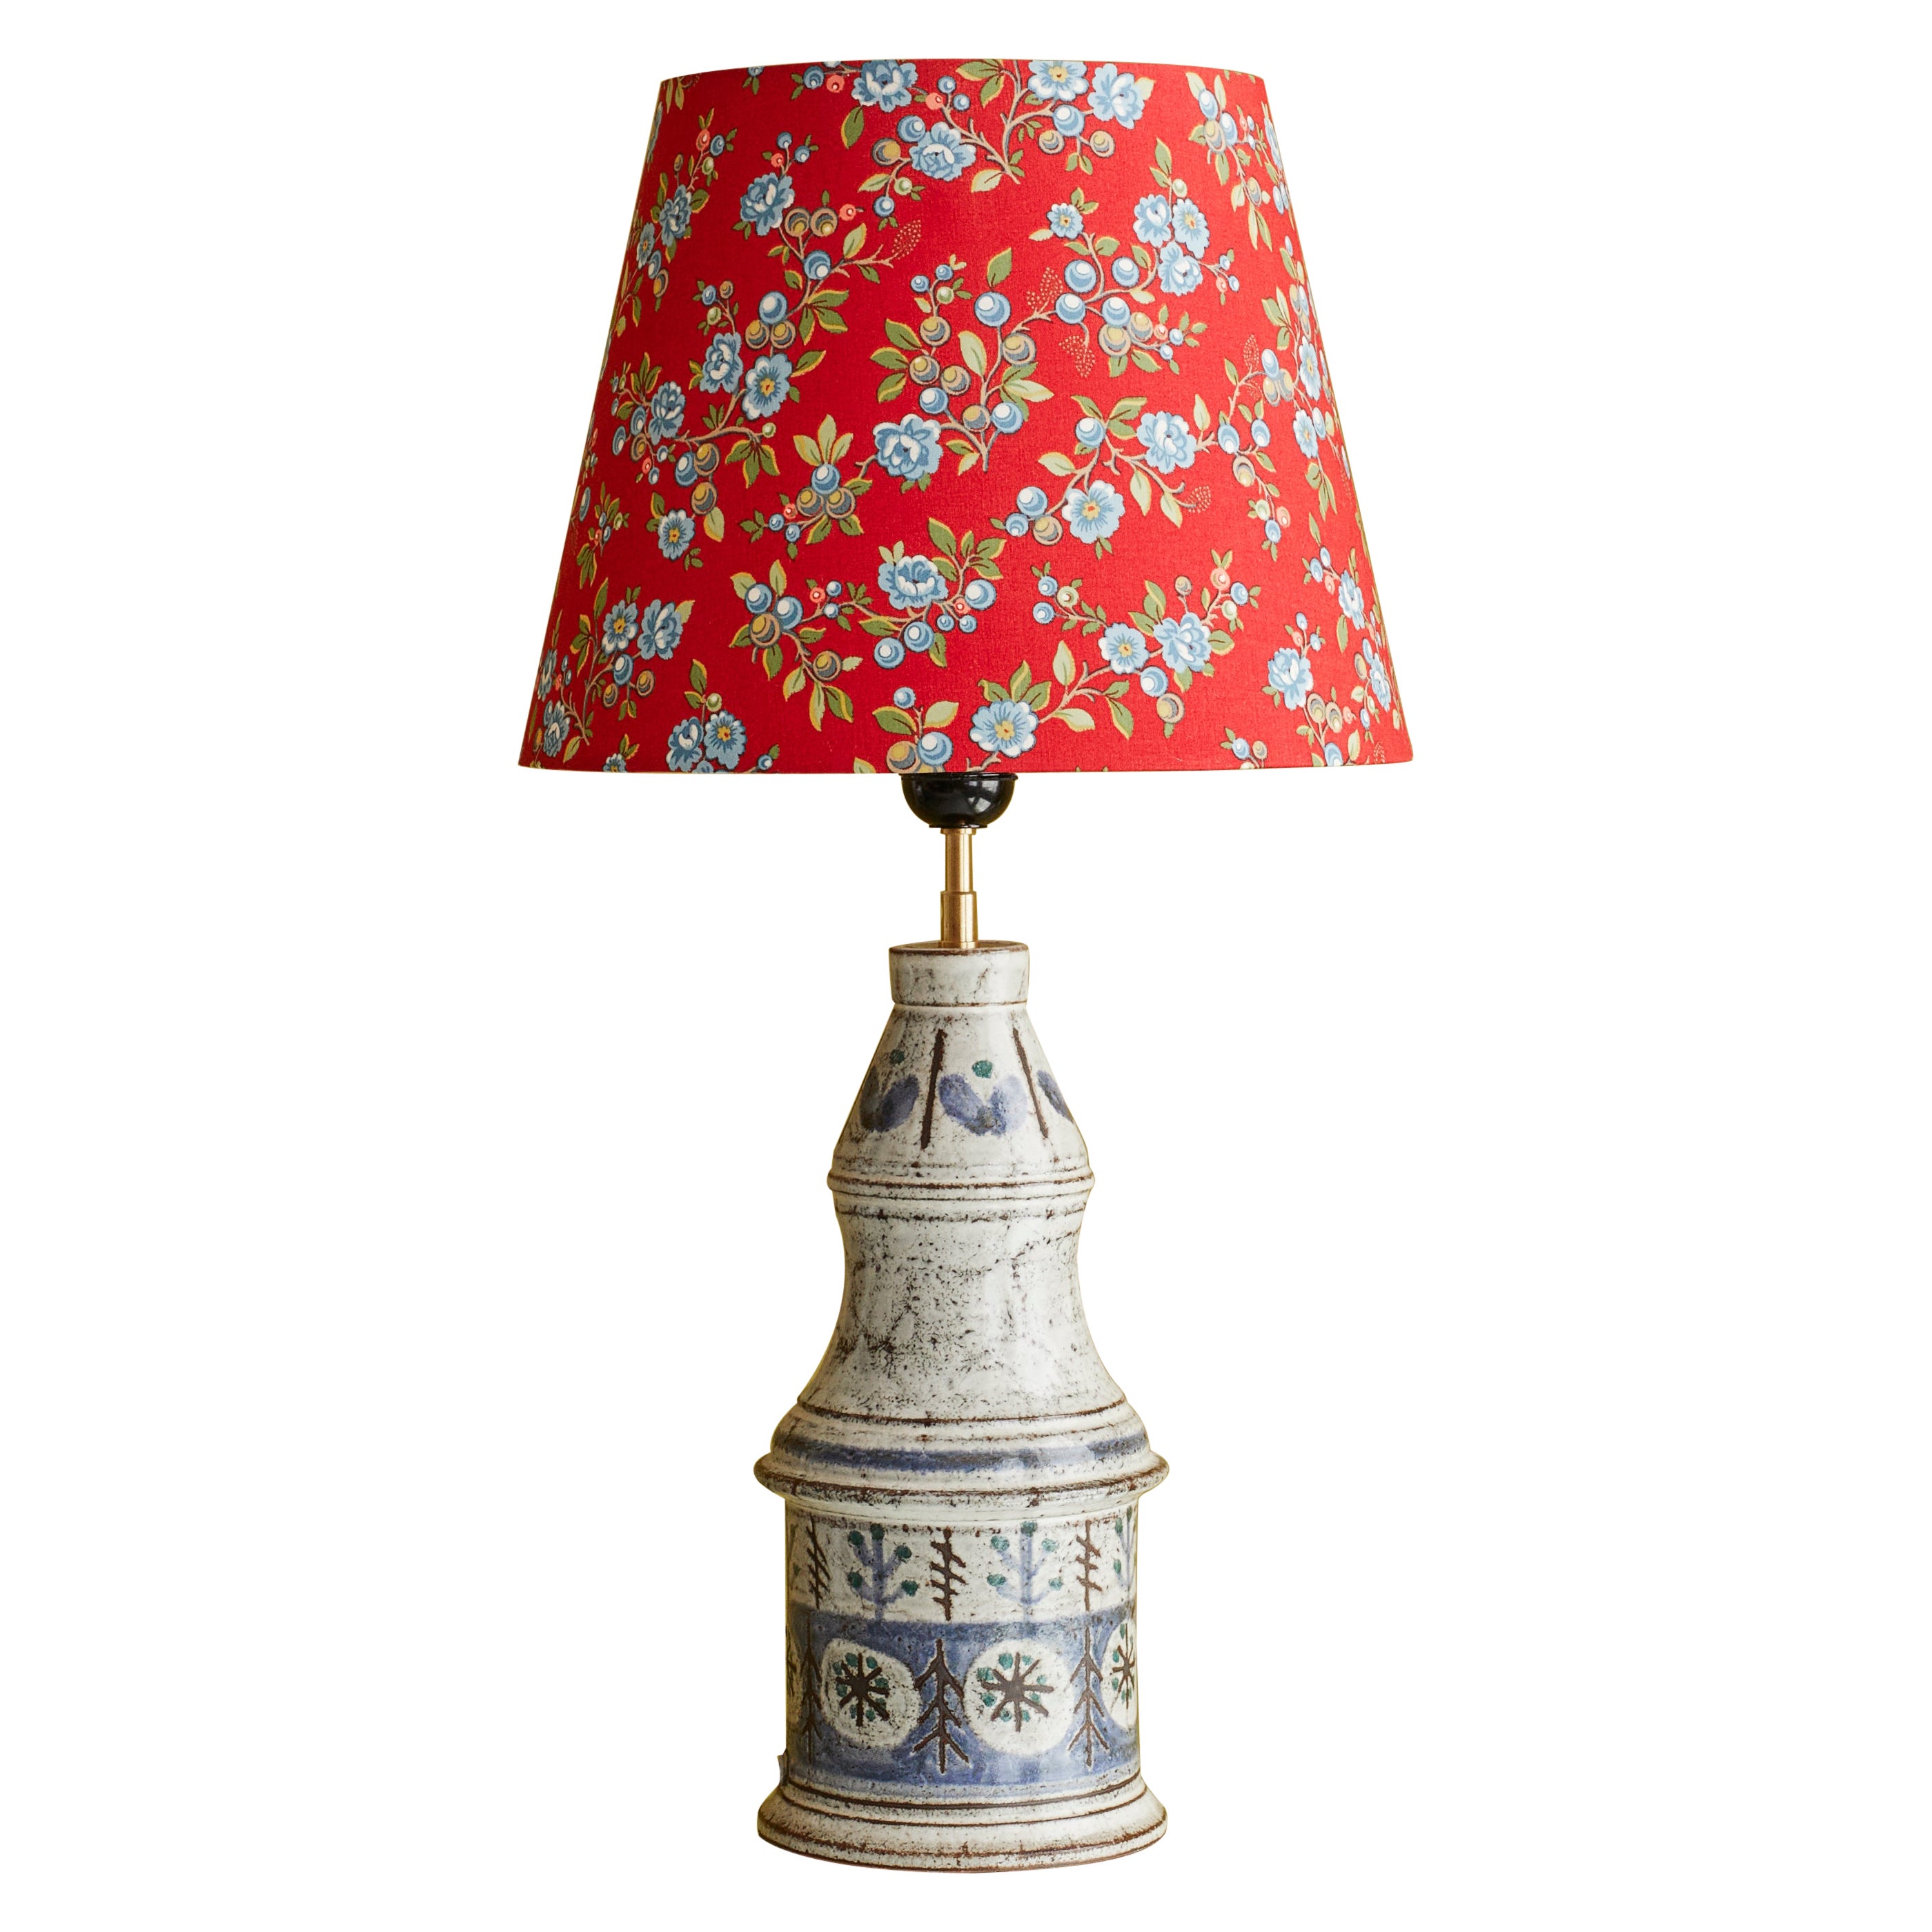 Vintage Gustave Reynaud Ceramic Table Lamp with Customized Shade, France, 1960's For Sale